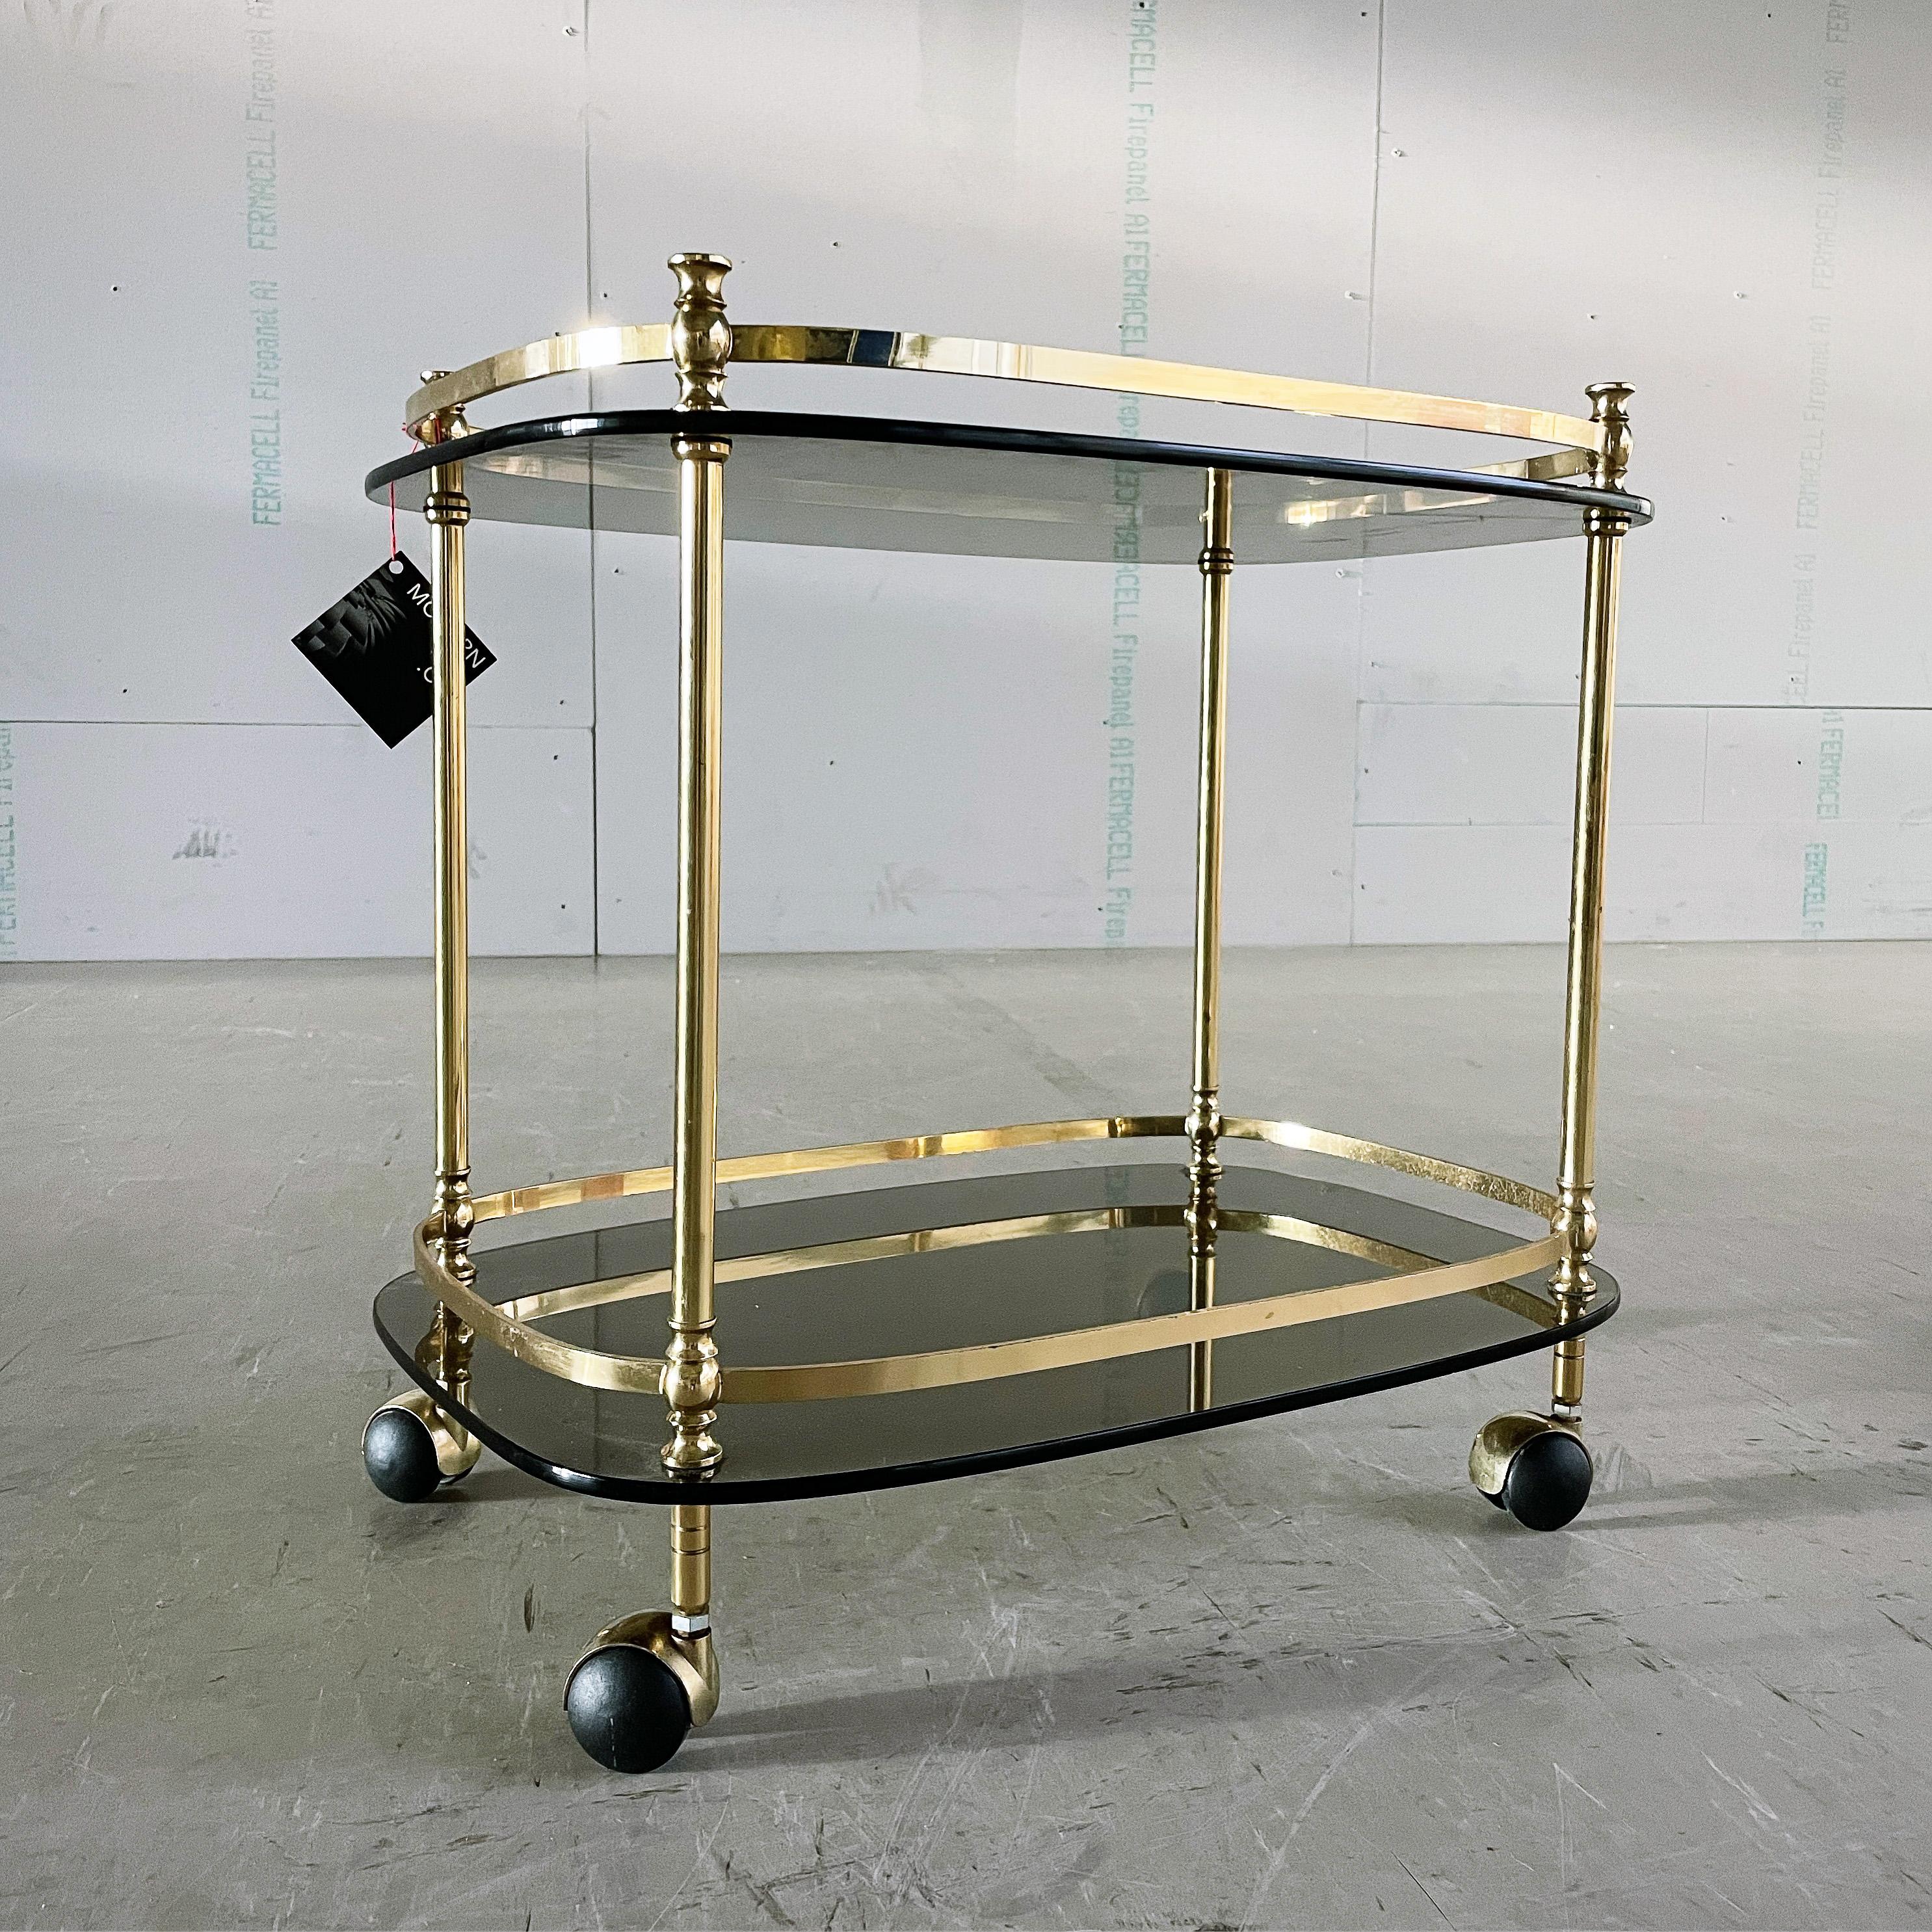 1970's Hollywood Regency solid brass bar cart / drinks trolley with two smoked glass plates on coasters. Believed to be of Italian origin (unconfirmed).
Designer: Unknown
With minimal signs of wear.